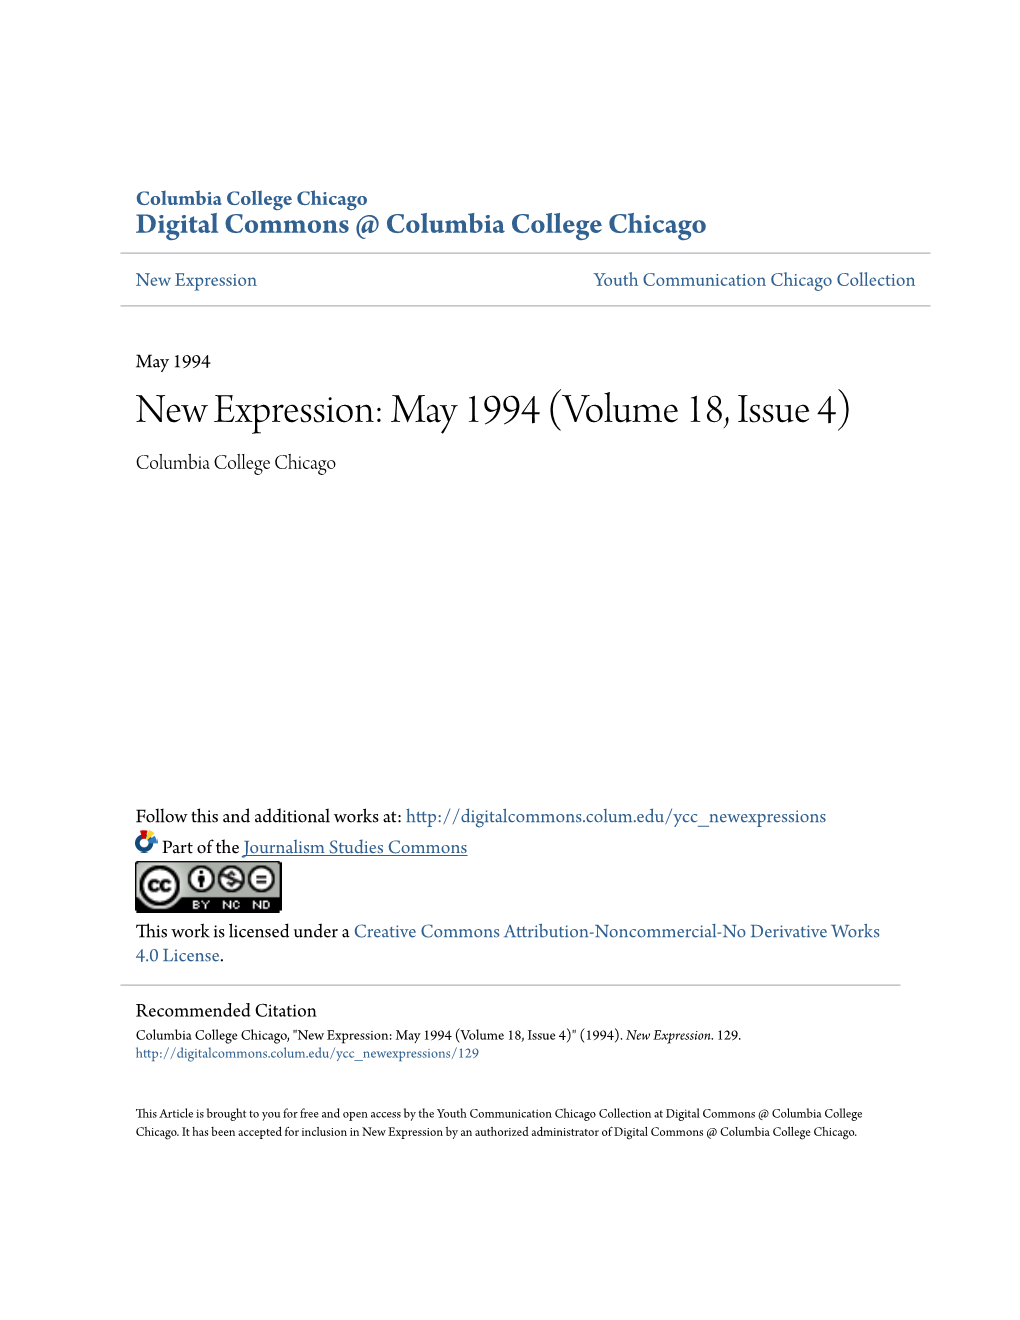 New Expression: May 1994 (Volume 18, Issue 4) Columbia College Chicago